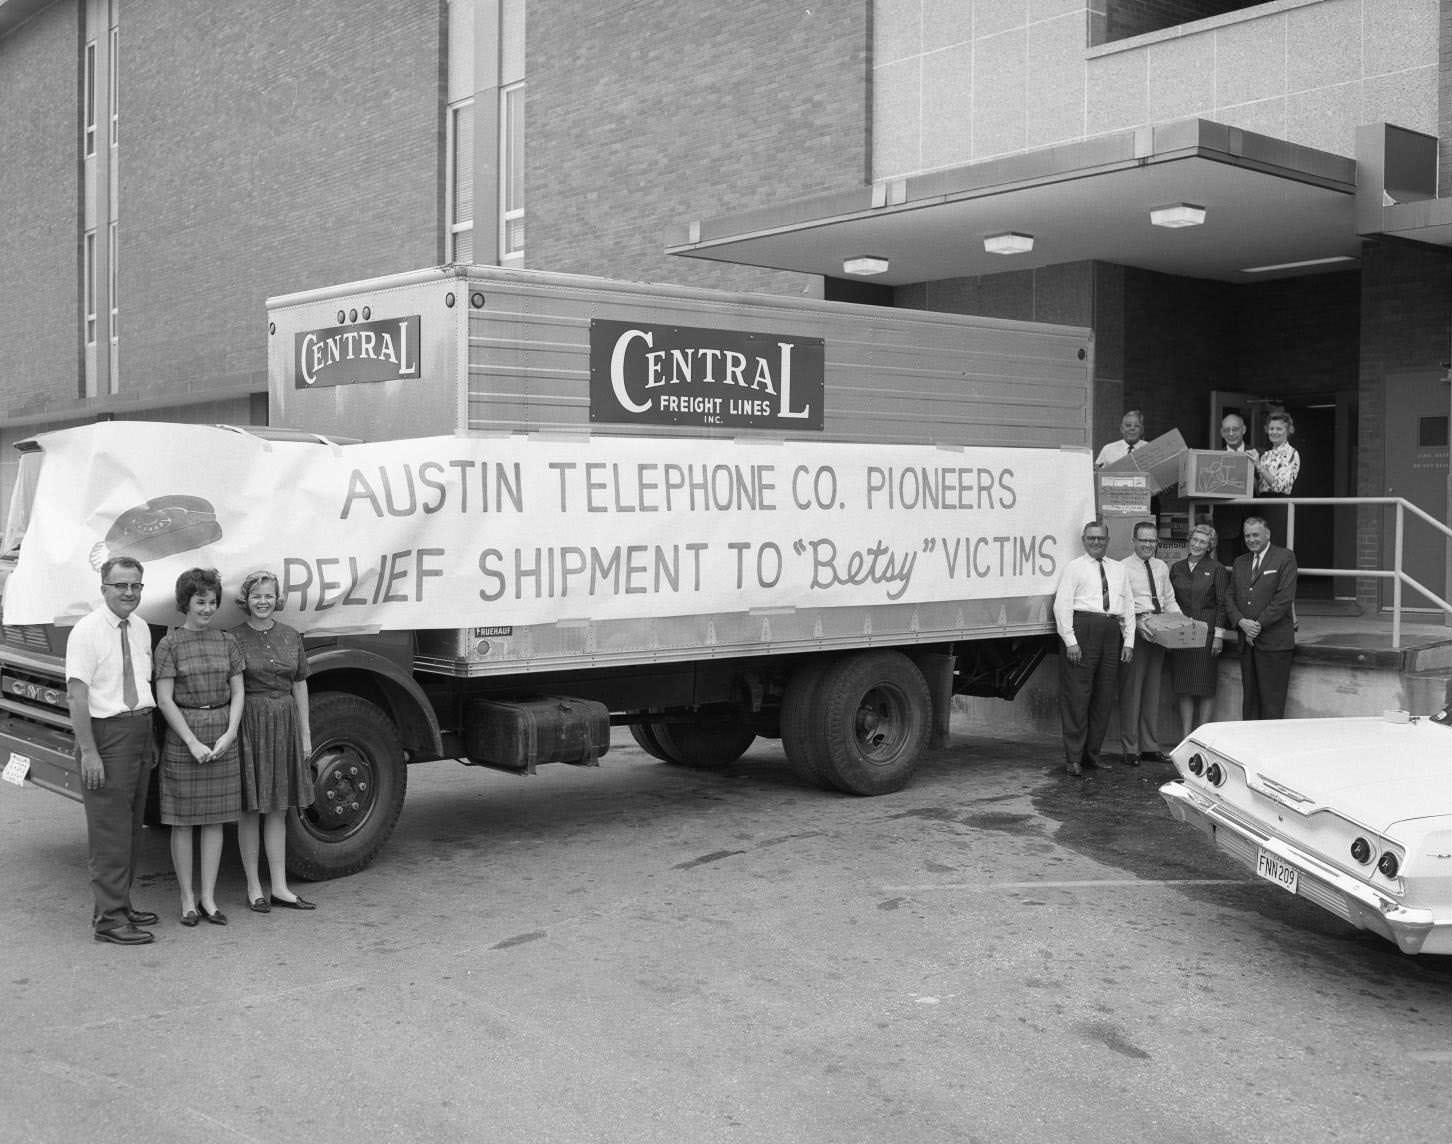 Austin Telephone Co. Pioneers stand outside relief truck, seeing off goods to the victims of Hurricane Betsy in New Orleans, 1965